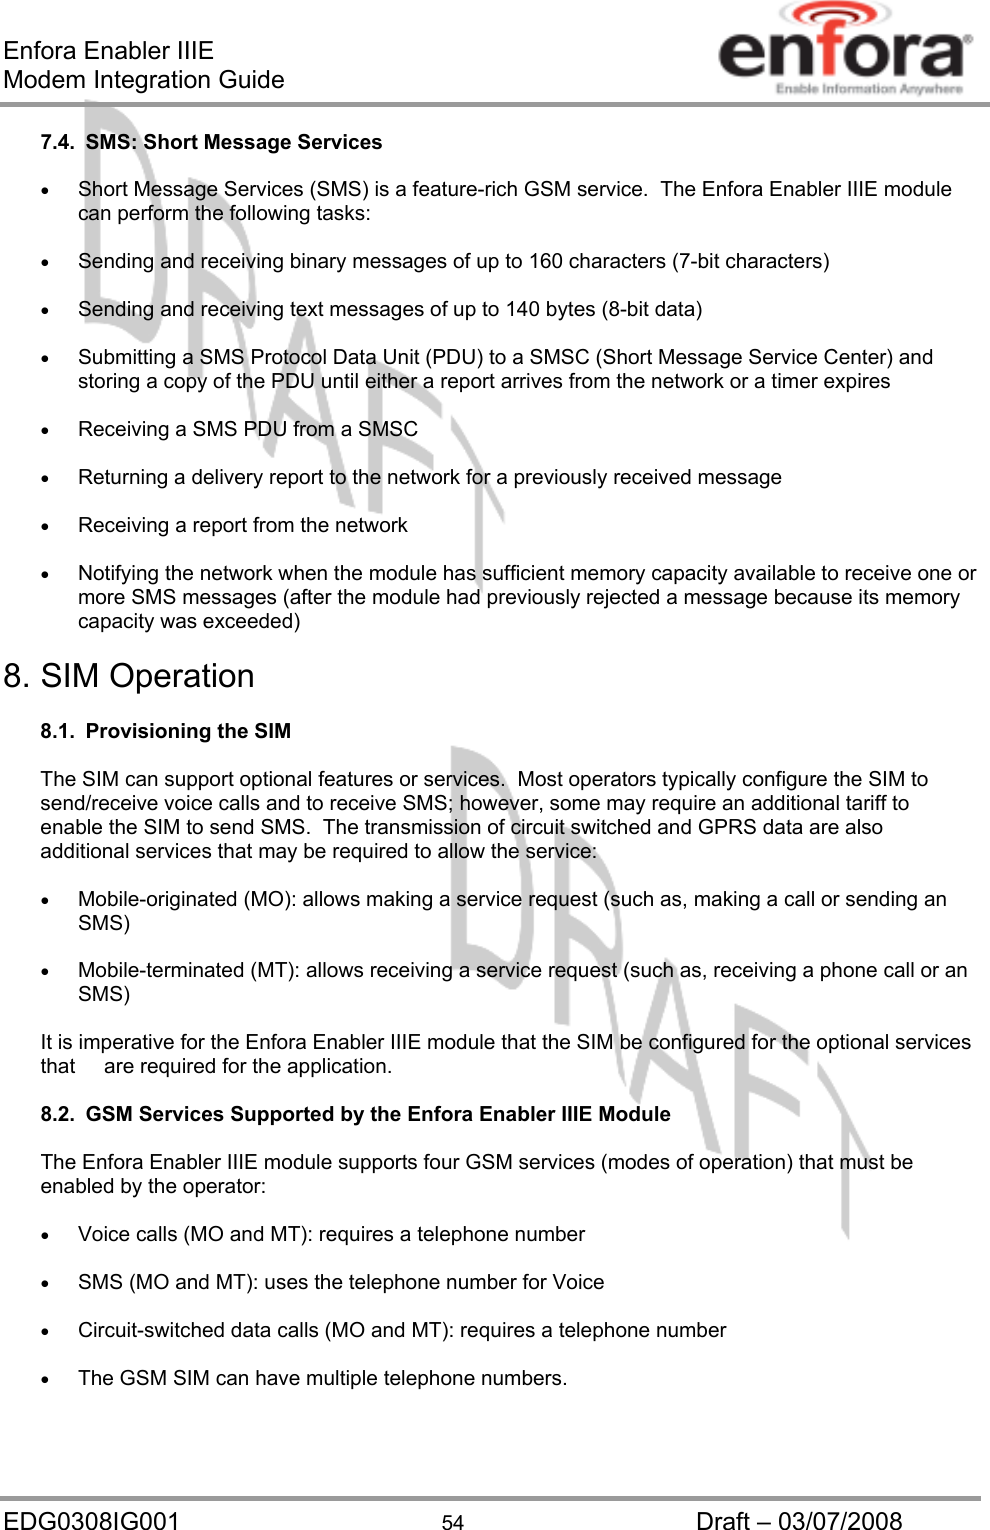 Enfora Enabler IIIE Modem Integration Guide EDG0308IG001  54  Draft – 03/07/2008 7.4.  SMS: Short Message Services  •  Short Message Services (SMS) is a feature-rich GSM service.  The Enfora Enabler IIIE module can perform the following tasks:  •  Sending and receiving binary messages of up to 160 characters (7-bit characters)  •  Sending and receiving text messages of up to 140 bytes (8-bit data)  •  Submitting a SMS Protocol Data Unit (PDU) to a SMSC (Short Message Service Center) and storing a copy of the PDU until either a report arrives from the network or a timer expires  •  Receiving a SMS PDU from a SMSC  •  Returning a delivery report to the network for a previously received message  •  Receiving a report from the network  •  Notifying the network when the module has sufficient memory capacity available to receive one or more SMS messages (after the module had previously rejected a message because its memory capacity was exceeded)  8. SIM Operation  8.1.  Provisioning the SIM  The SIM can support optional features or services.  Most operators typically configure the SIM to send/receive voice calls and to receive SMS; however, some may require an additional tariff to enable the SIM to send SMS.  The transmission of circuit switched and GPRS data are also additional services that may be required to allow the service:  •  Mobile-originated (MO): allows making a service request (such as, making a call or sending an SMS)  •  Mobile-terminated (MT): allows receiving a service request (such as, receiving a phone call or an SMS)  It is imperative for the Enfora Enabler IIIE module that the SIM be configured for the optional services that     are required for the application.  8.2.  GSM Services Supported by the Enfora Enabler IIIE Module  The Enfora Enabler IIIE module supports four GSM services (modes of operation) that must be enabled by the operator:  •  Voice calls (MO and MT): requires a telephone number  •  SMS (MO and MT): uses the telephone number for Voice  •  Circuit-switched data calls (MO and MT): requires a telephone number  •  The GSM SIM can have multiple telephone numbers.   